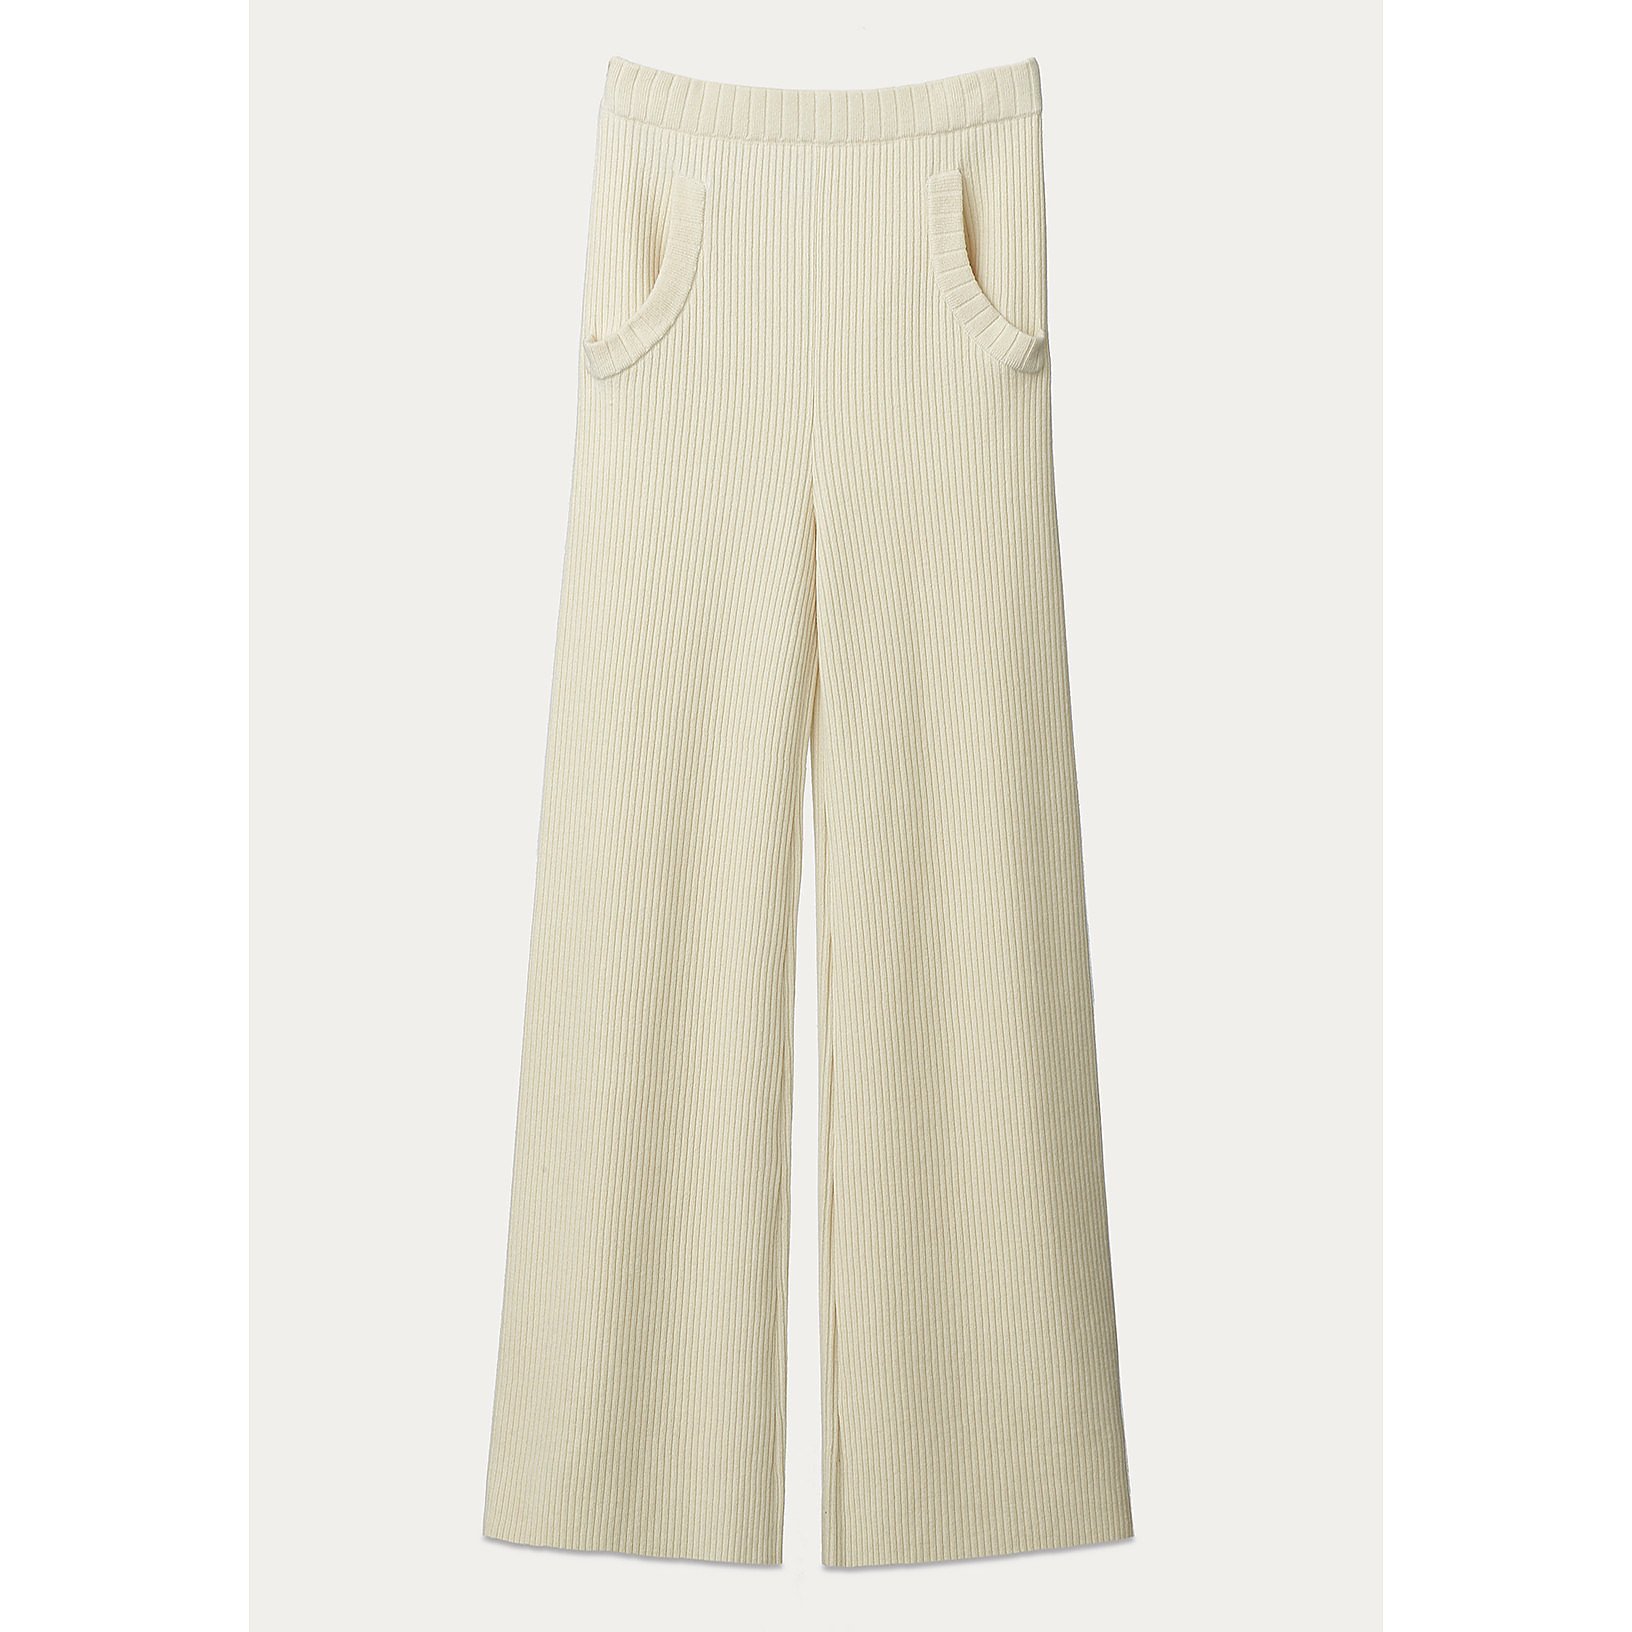 PORTS 1961 Rib Knit Trousers With Front Pockets